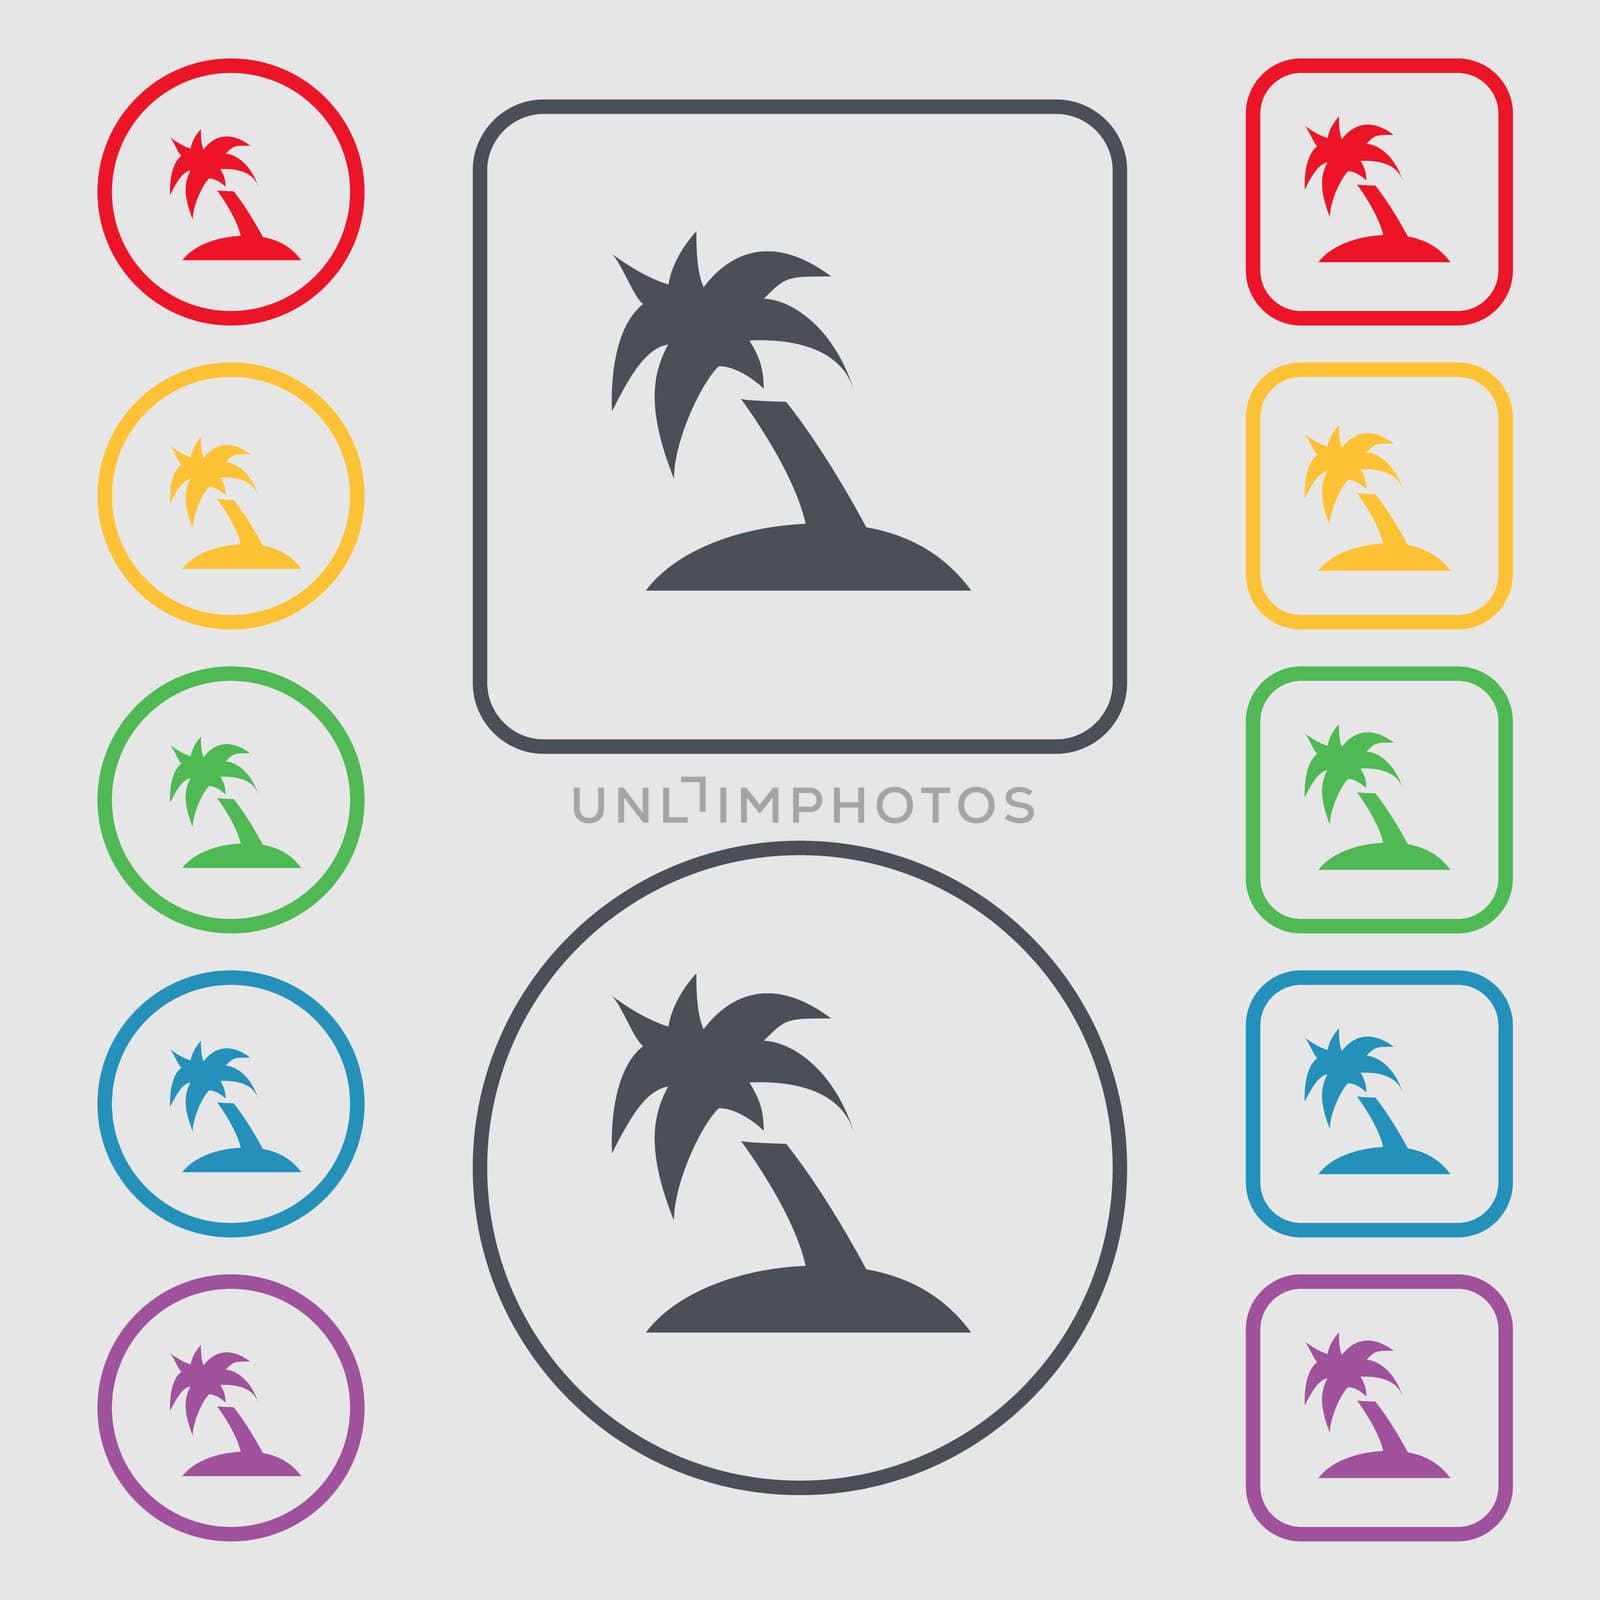 Palm Tree, Travel trip icon sign. symbol on the Round and square buttons with frame. illustration